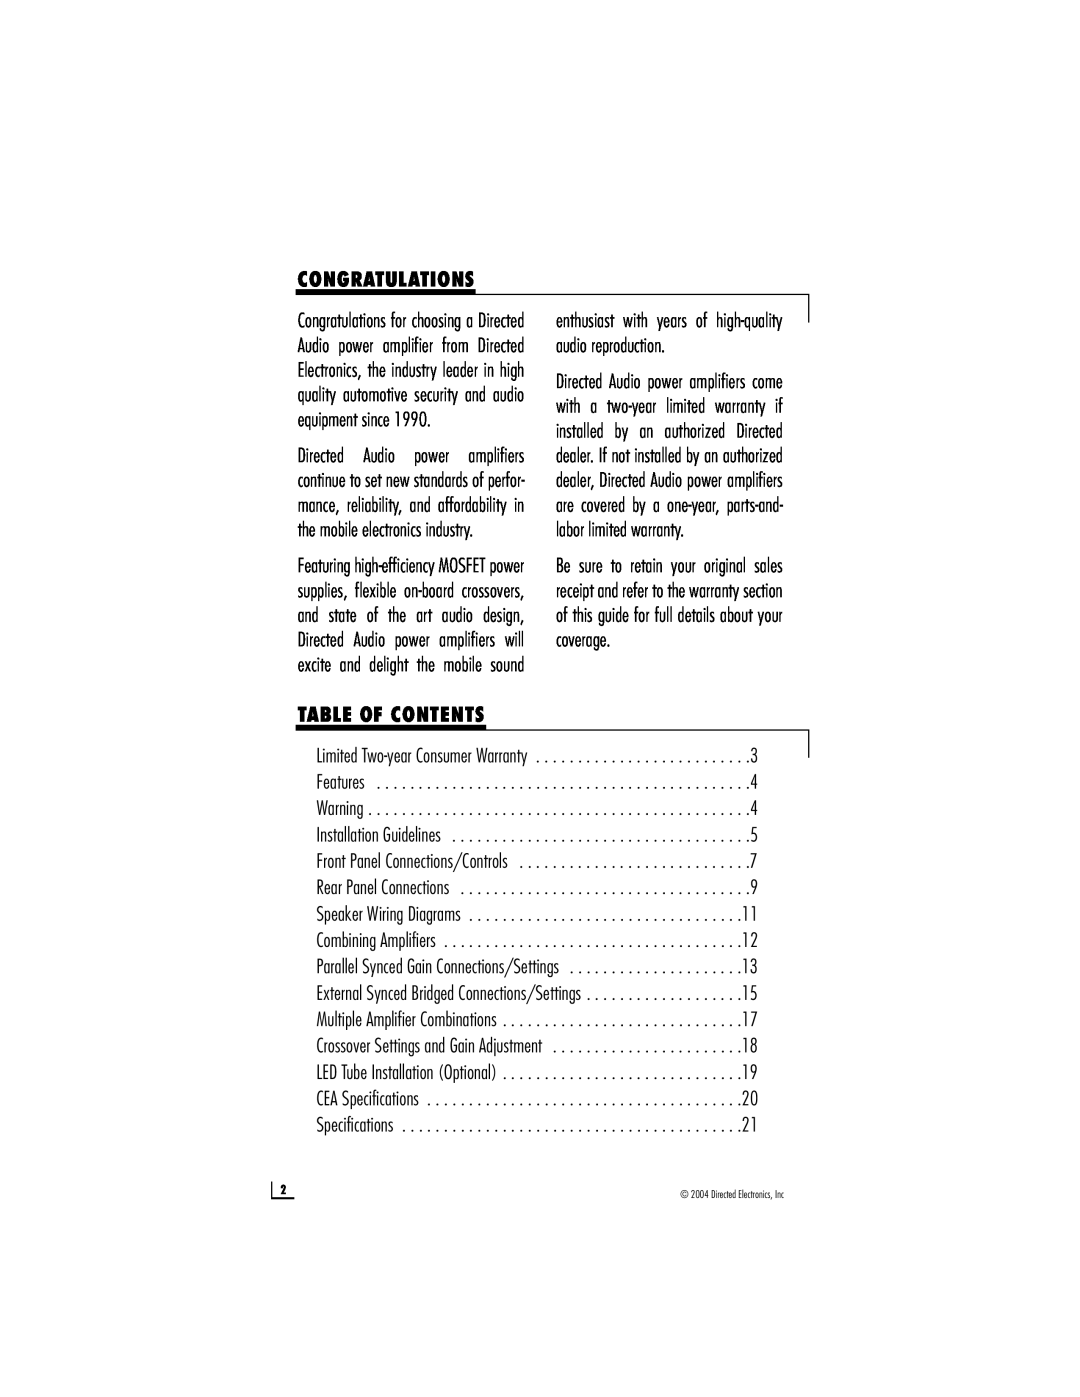 Directed Electronics D2400, D1200 owner manual Congratulations, Table Of Contents, Directed Electronics, Inc 